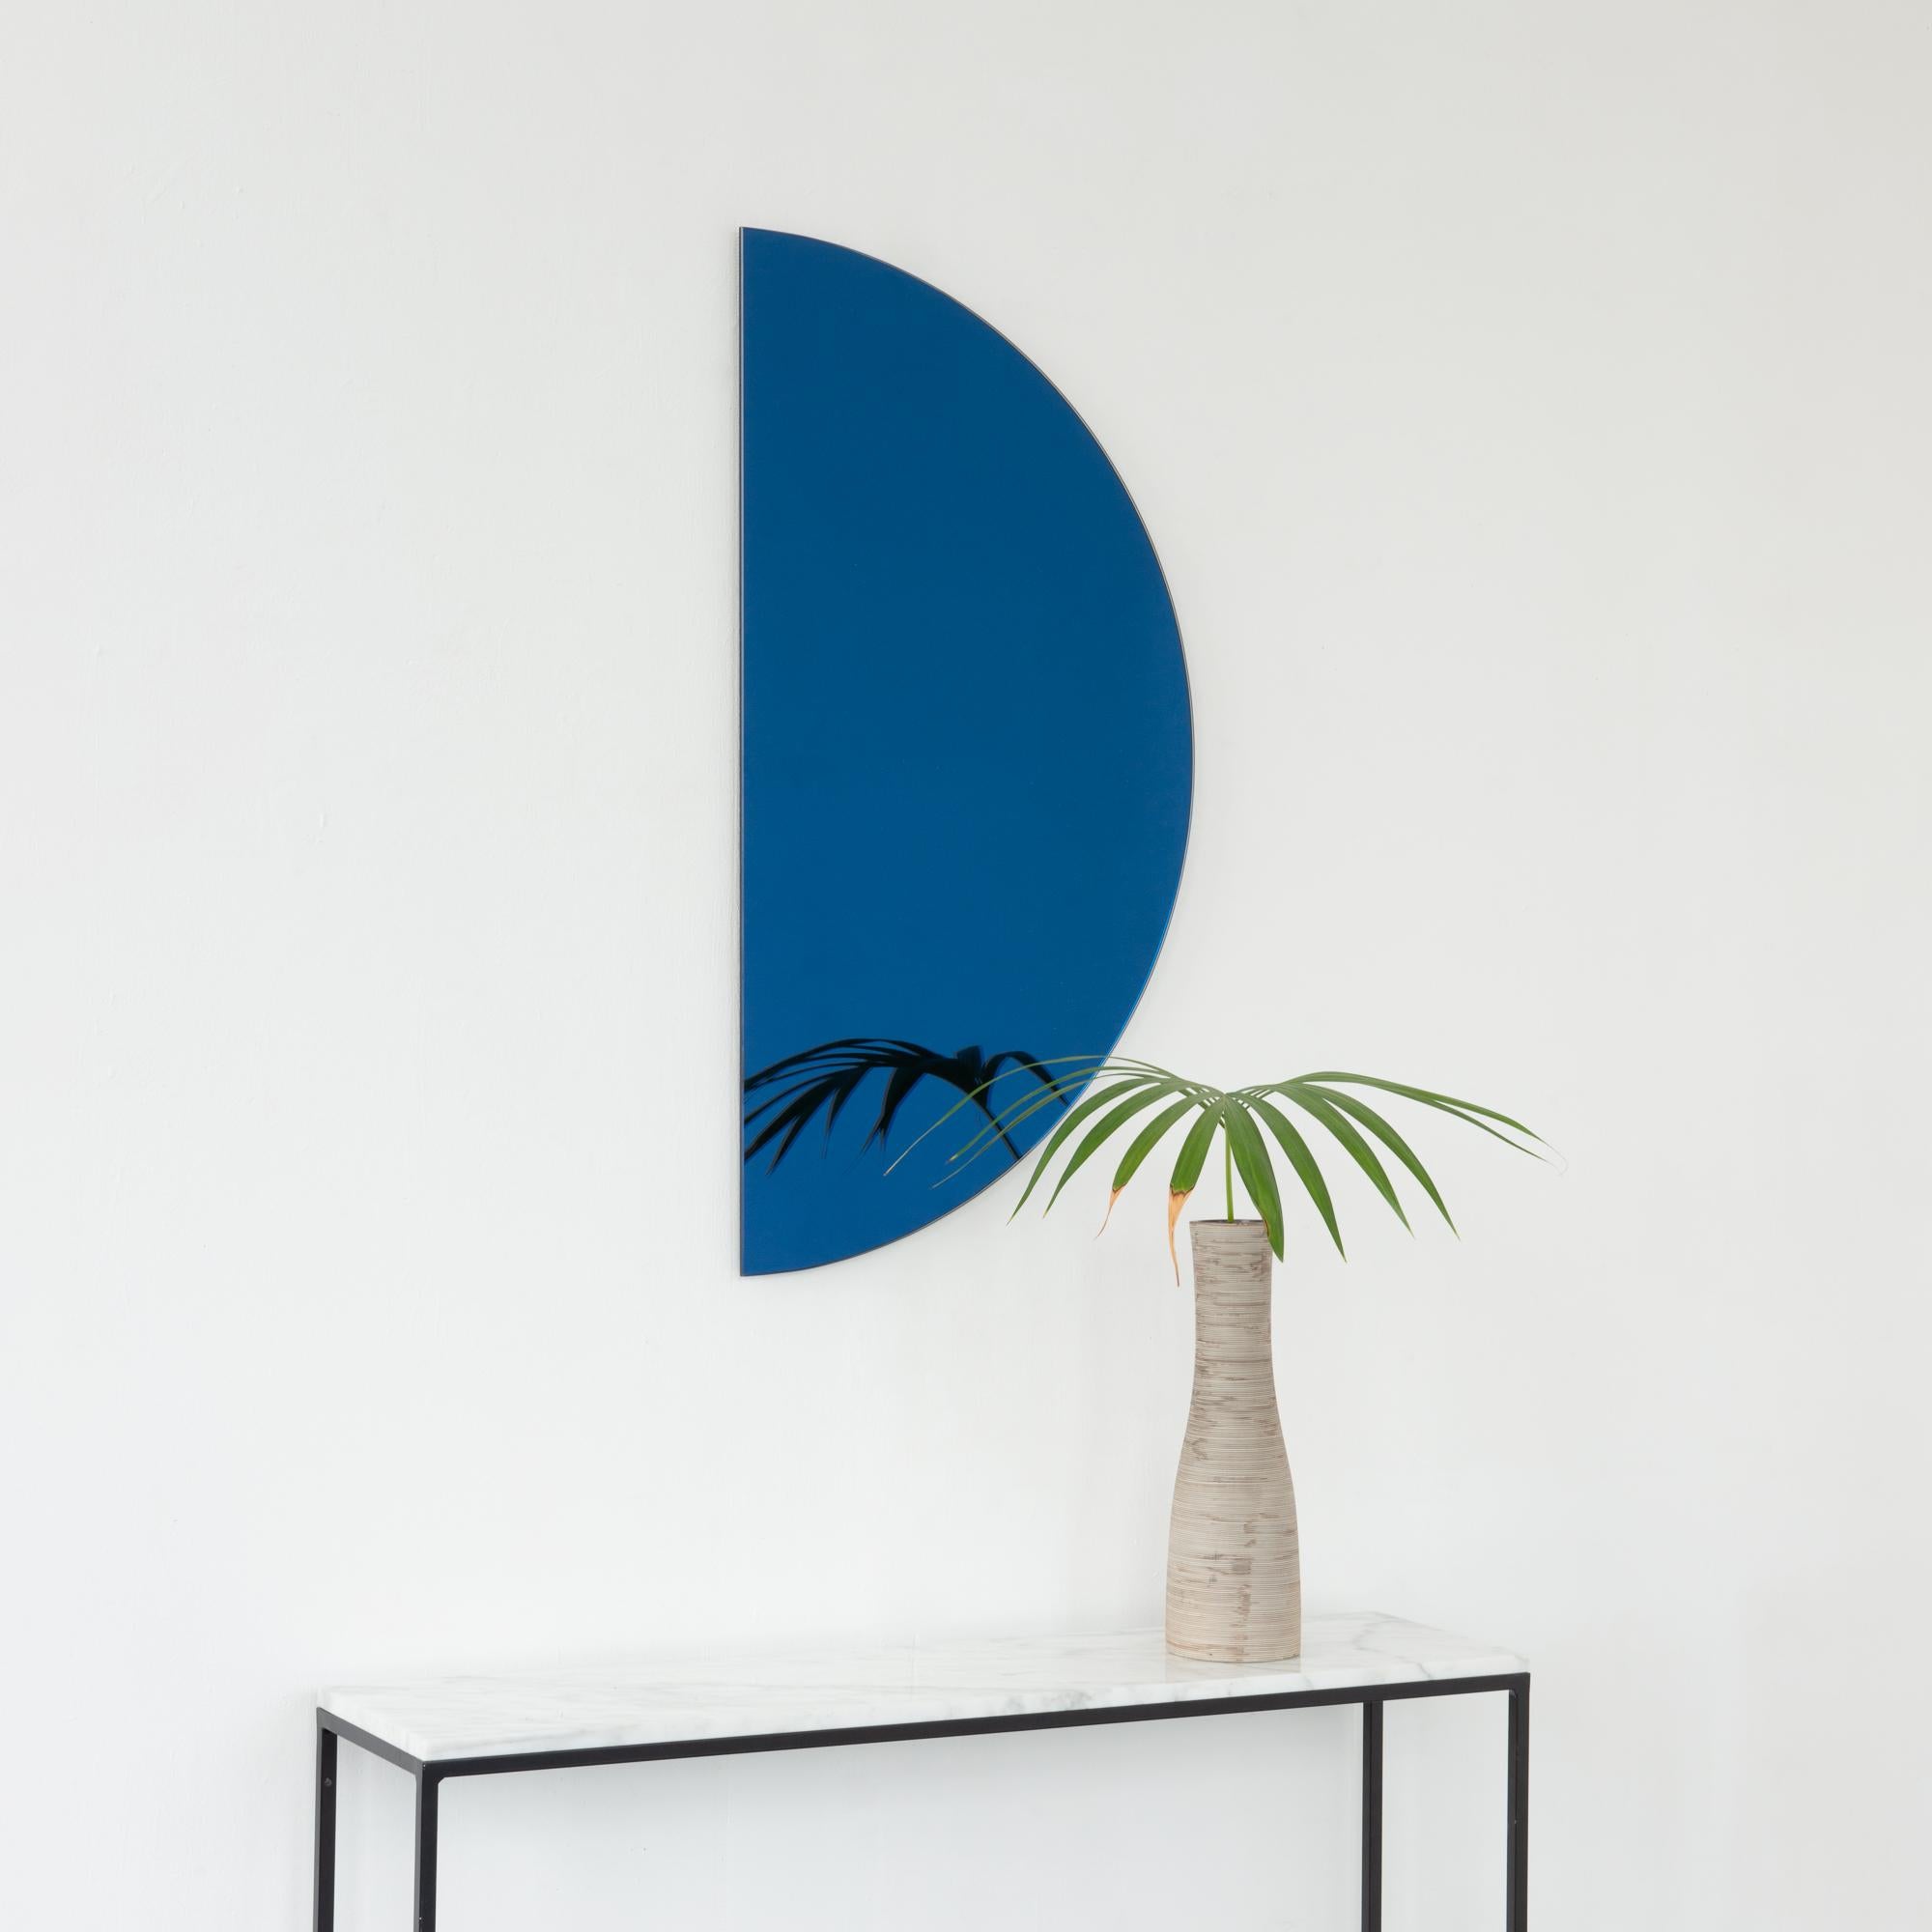 Minimalist half-moon Luna™ blue tinted frameless mirror with a floating effect. Fitted with a quality and ingenious hanging system for a flexible installation in 4 different directions. Designed and made in London, UK. 

The backing has a brand new